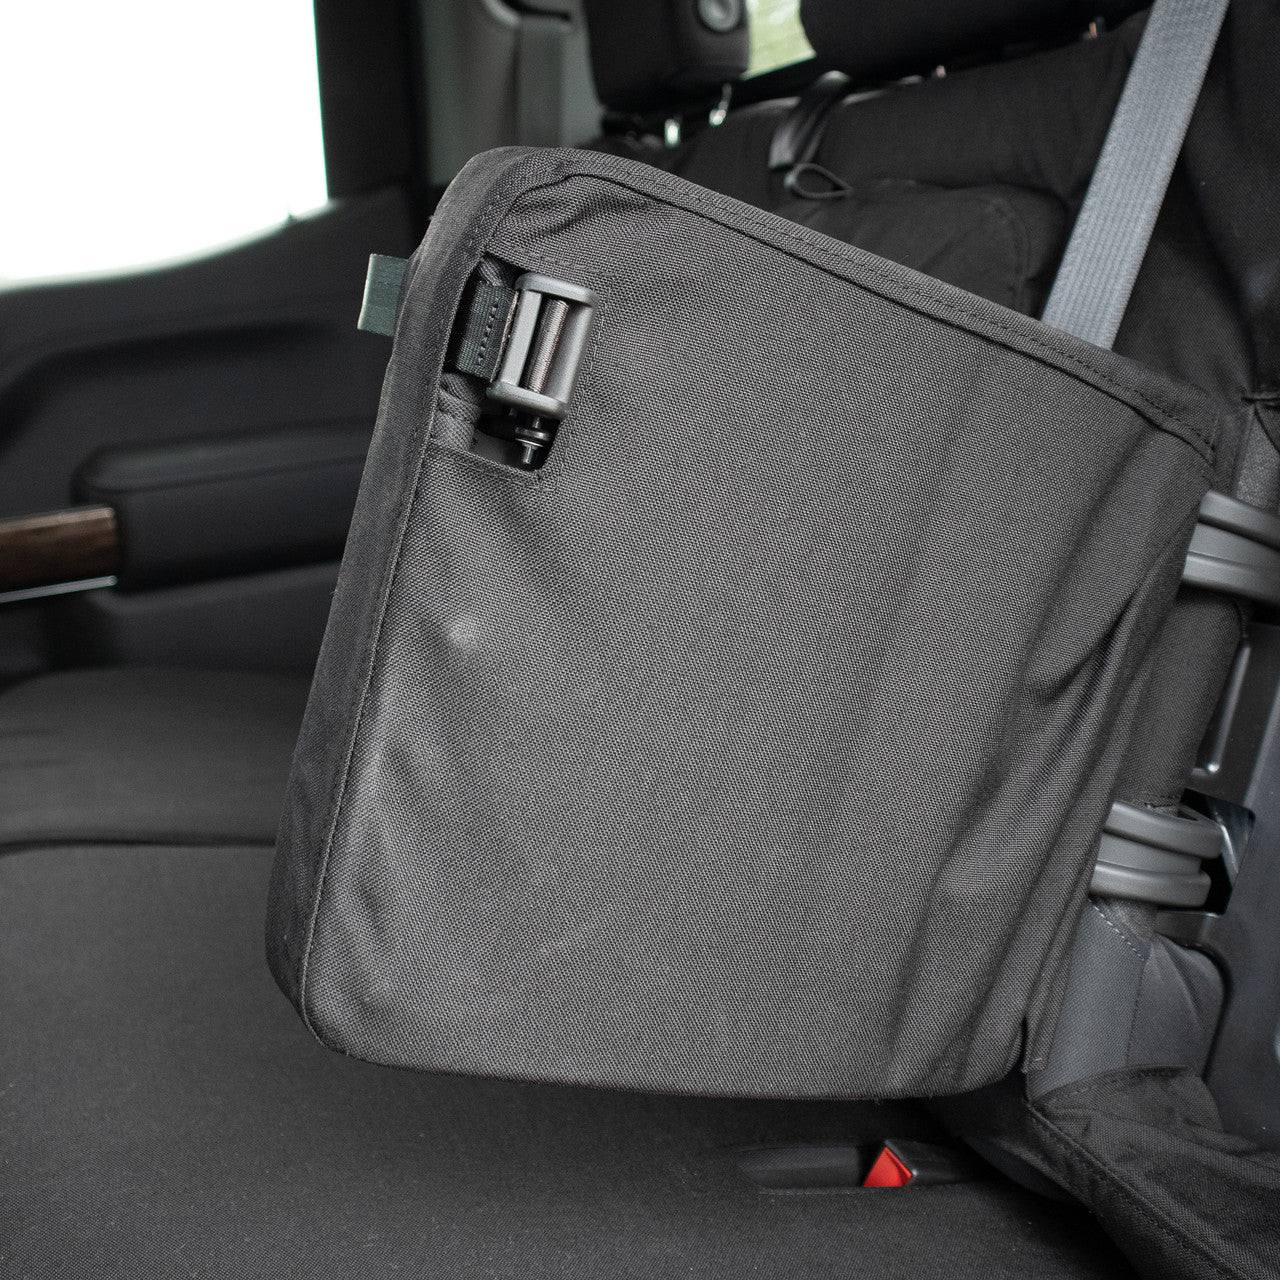 TigerTough seat cover does not restrict storage door functionality